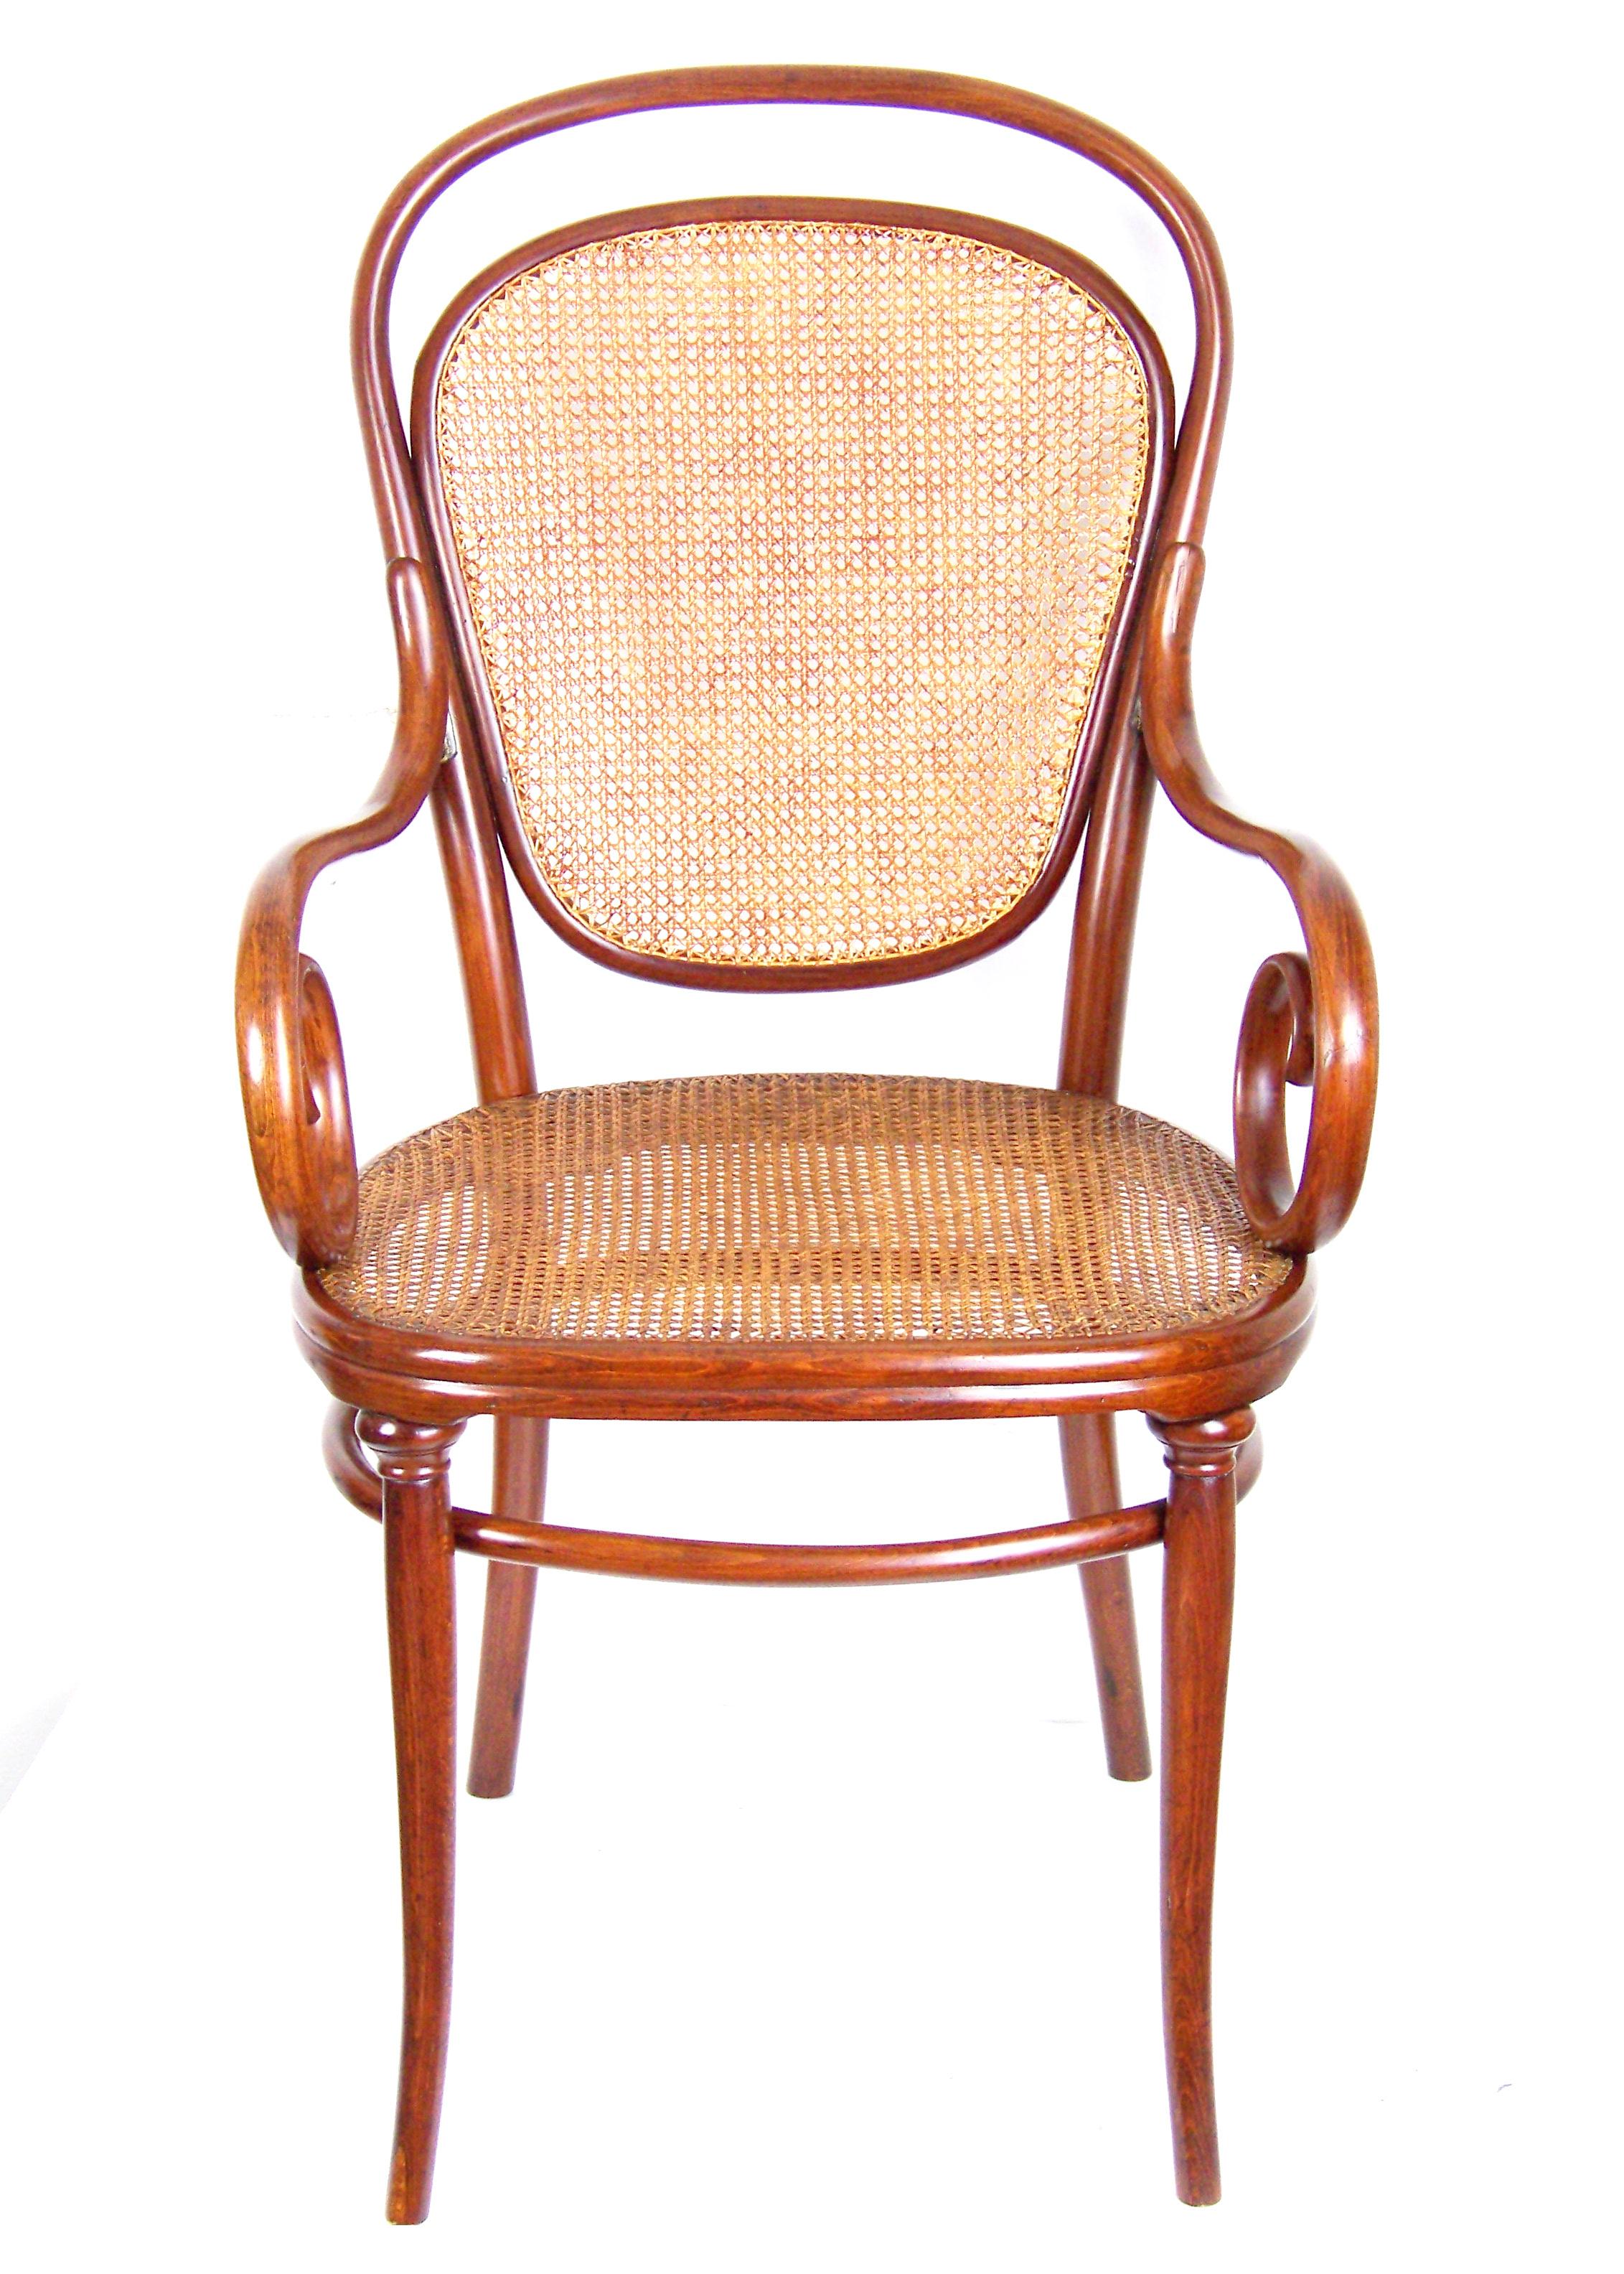 Manufactured in Austria by the Gebrüder Thonet company. Newly restored, new backrest string, new shellack polish.